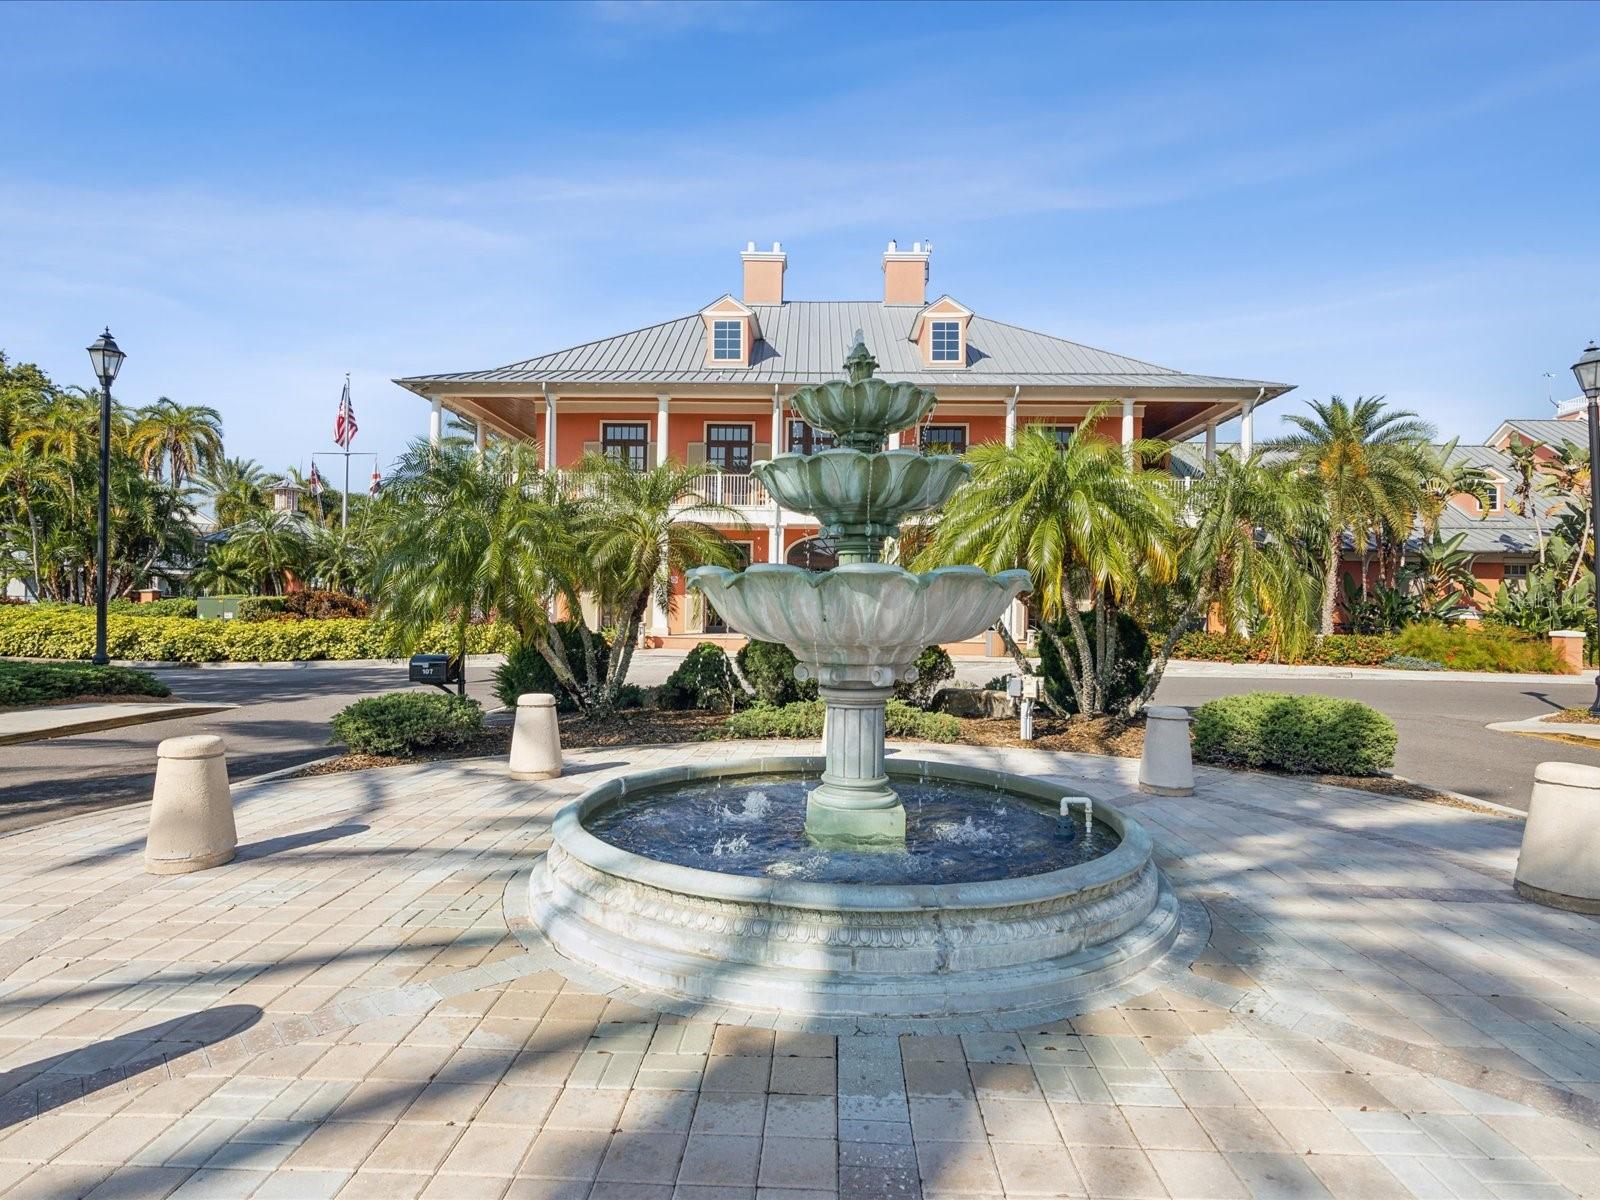 Create many happy memories in front of Mirabay's most photographed iconic fountain.